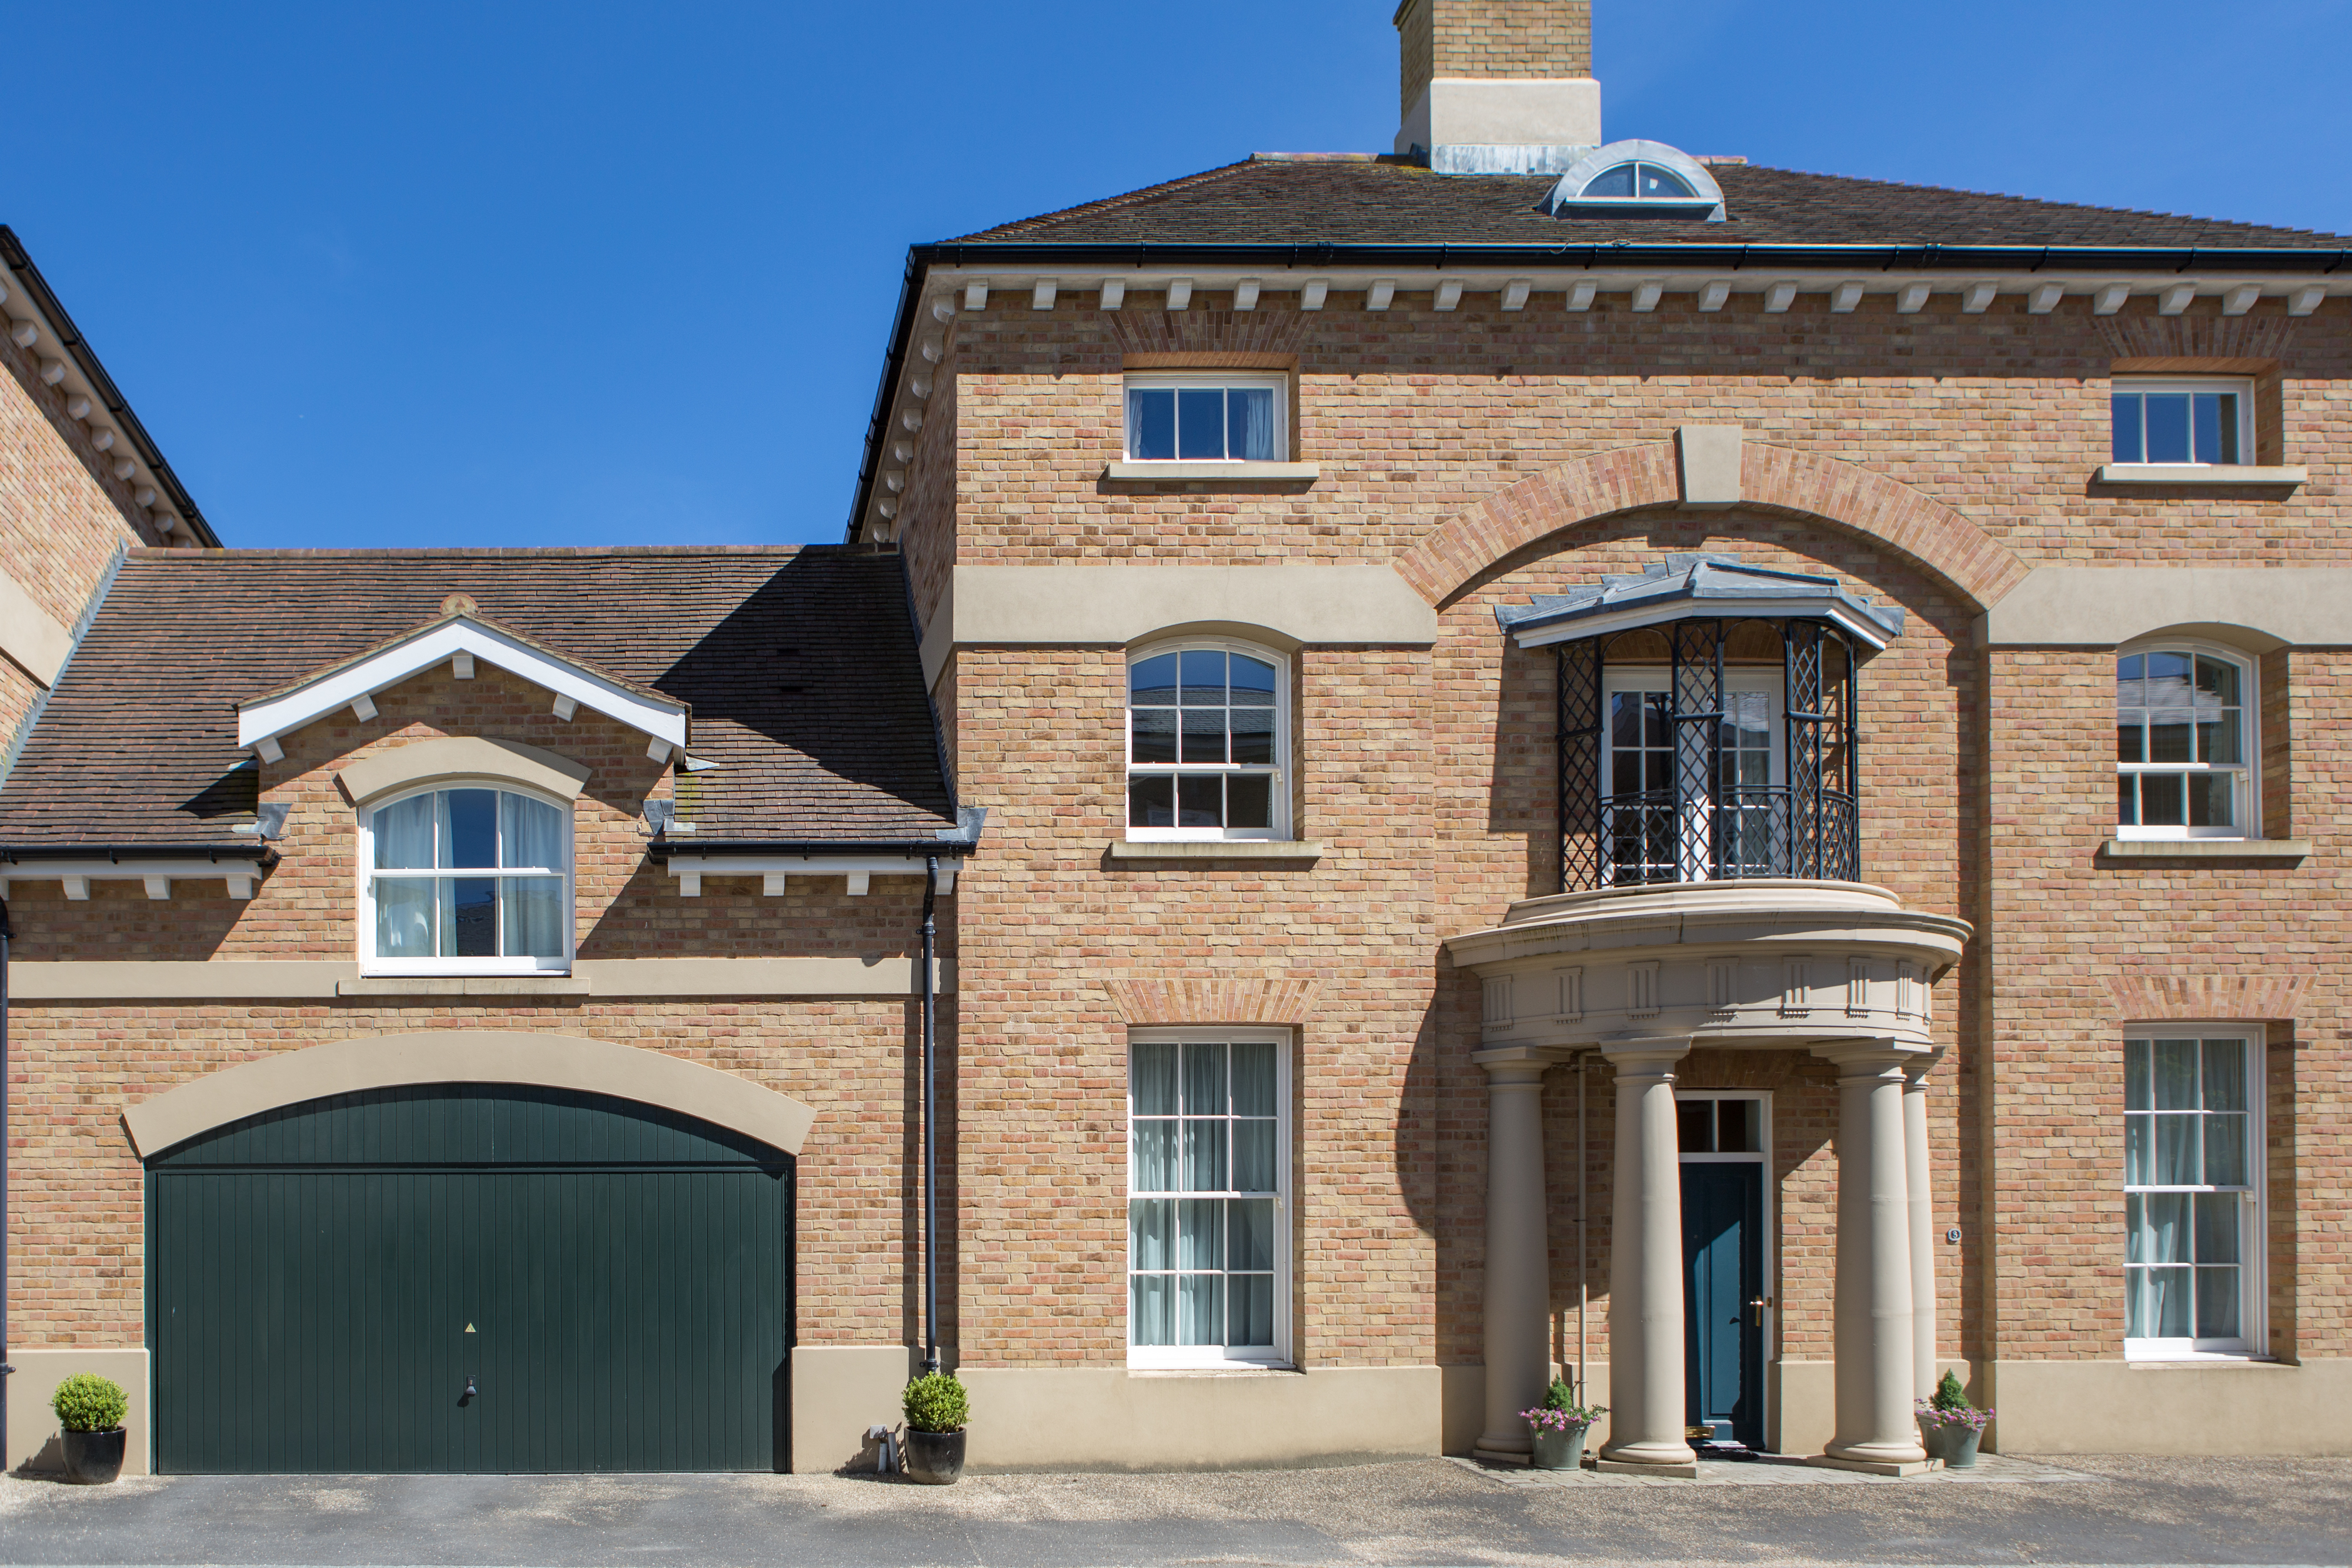 A home in Phase 2, Poundbury